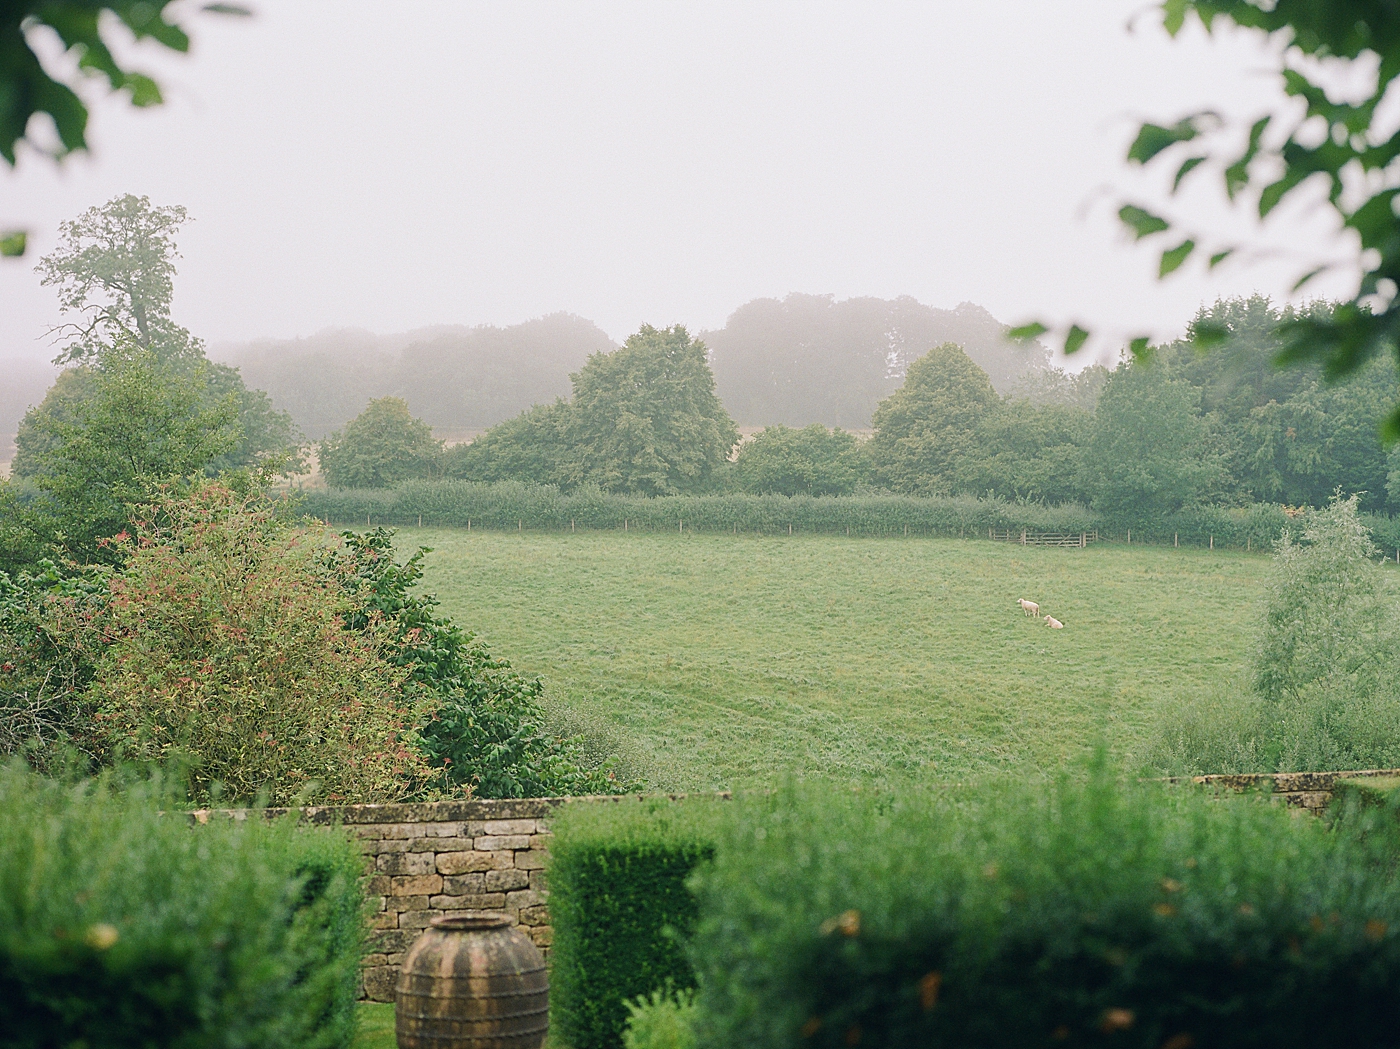 Green field with sheep in the rain | Photo by Cotswolds Wedding Photographer Hope Helmuth 